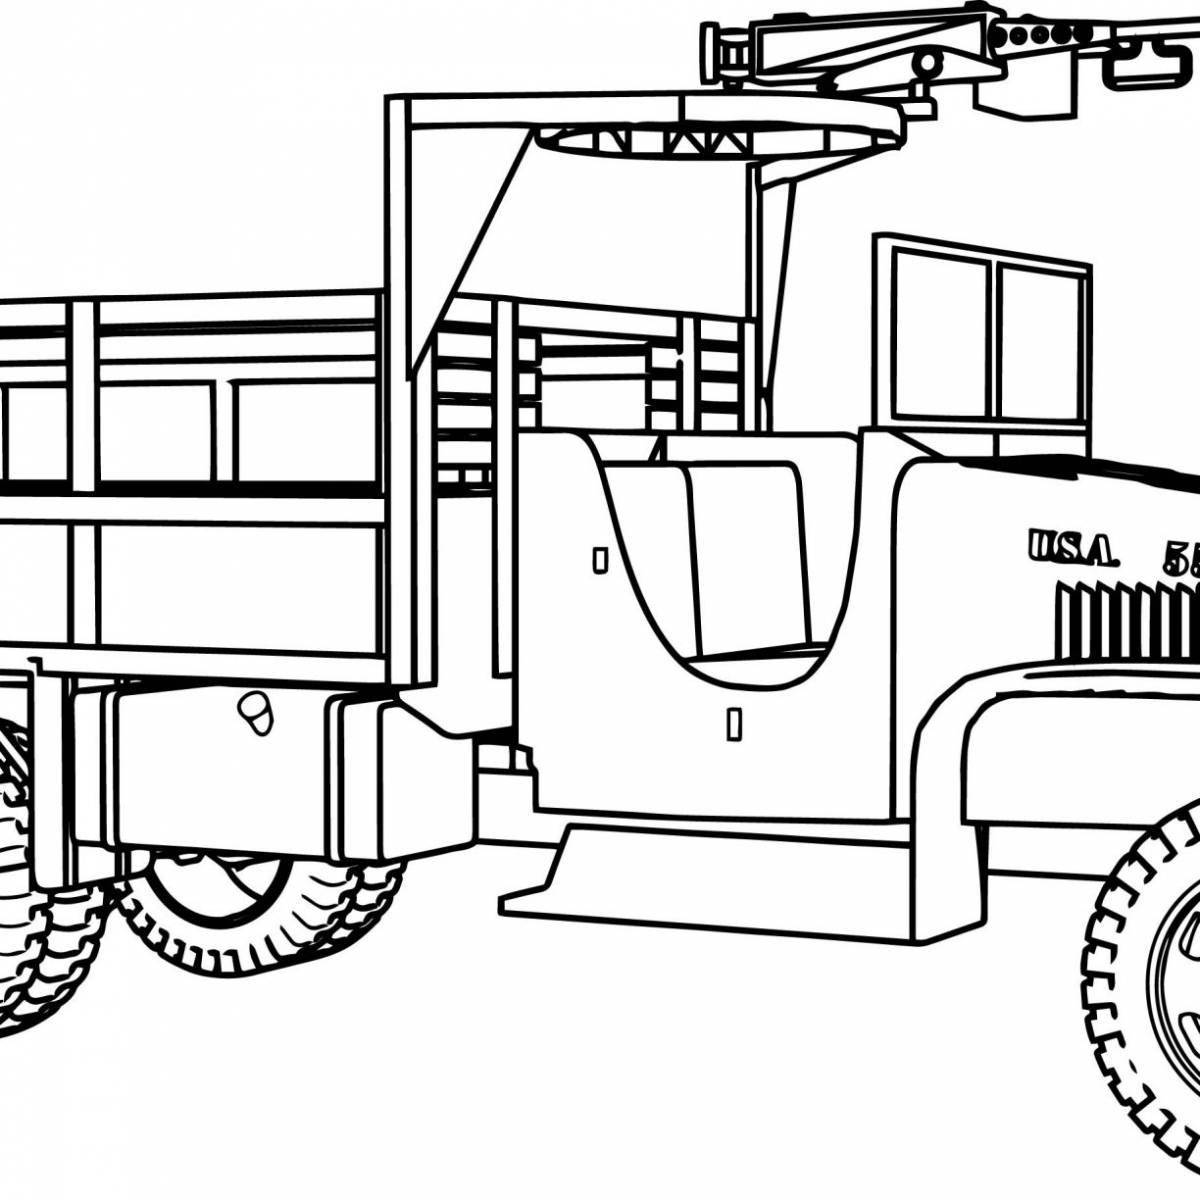 Katyusha colorful military vehicles coloring book for kids